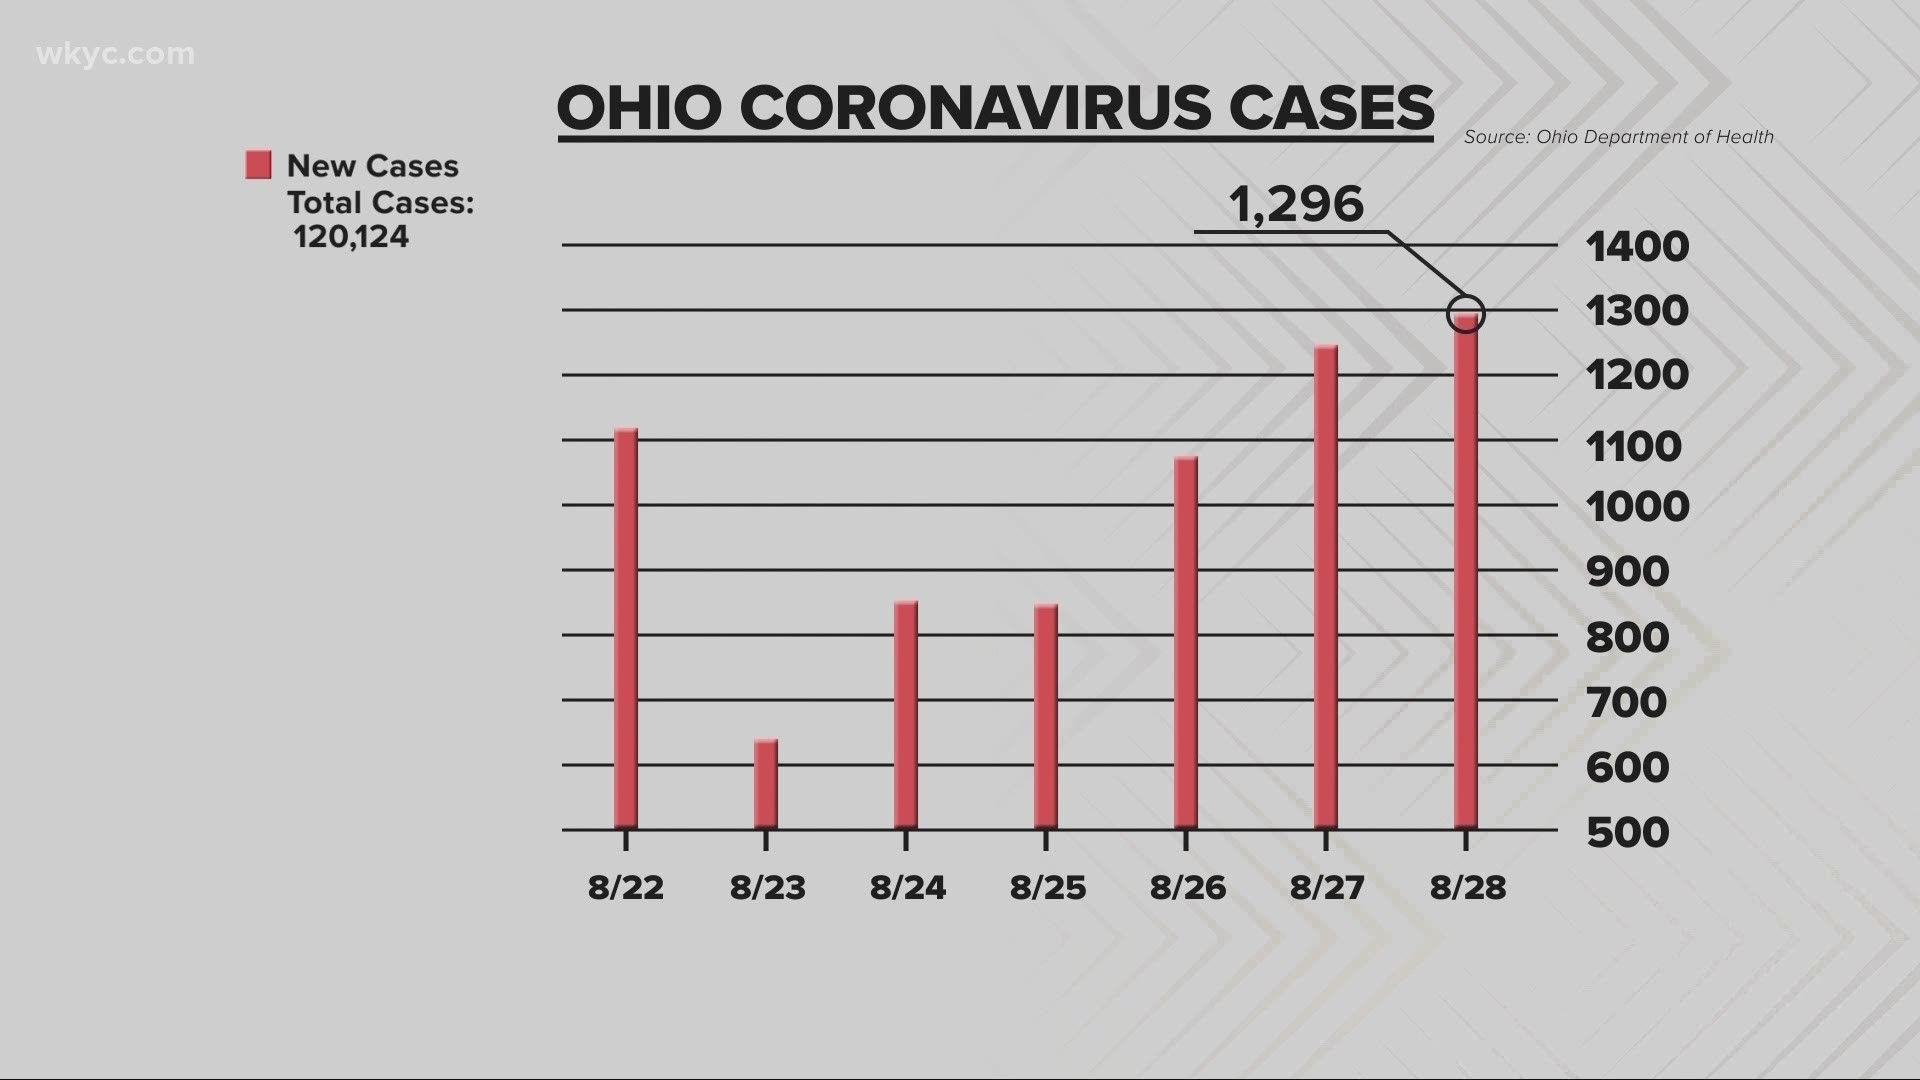 Ohio reports 1,296 new cases of the coronavirus today. That's 52 more than yesterday.